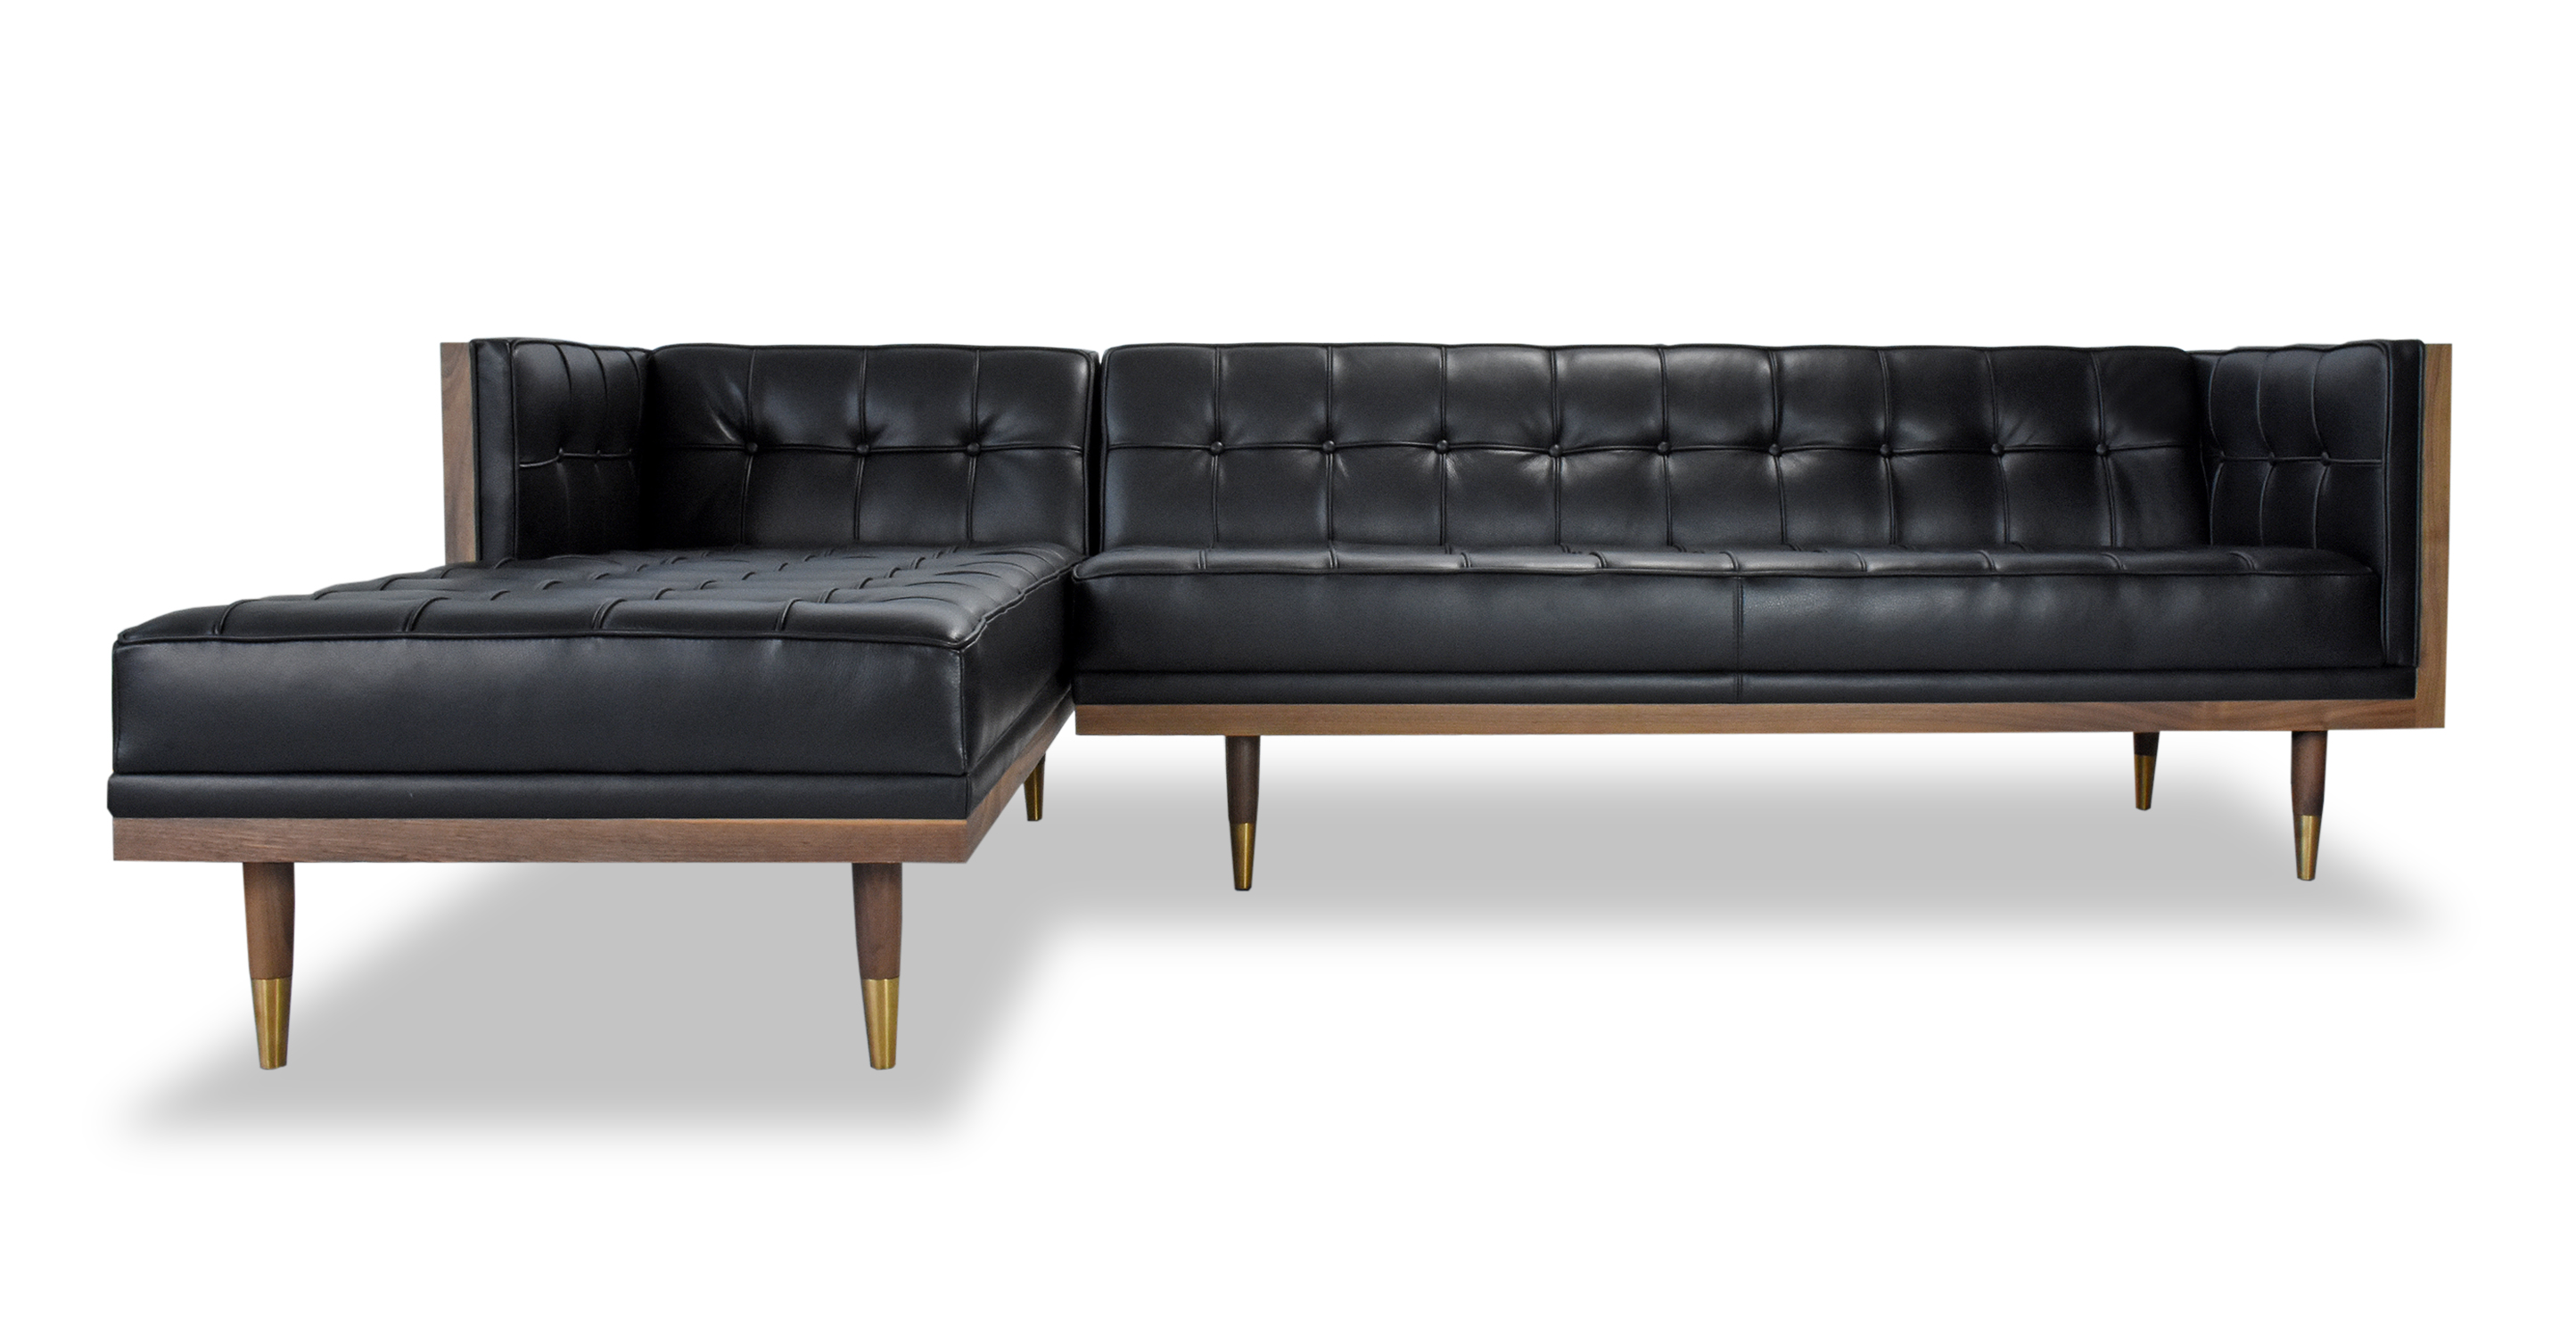 Woodrow Left Facing Sectional in Black Leather has fixed seat and back cushions. There is button tufting on the back cushion, sides of the sofa and on the seat cushions. The frame and legs are walnut colored. The legs have brass colored ferrules on the ends. The back and outsides of the sectional are wooden. The leather color is black.